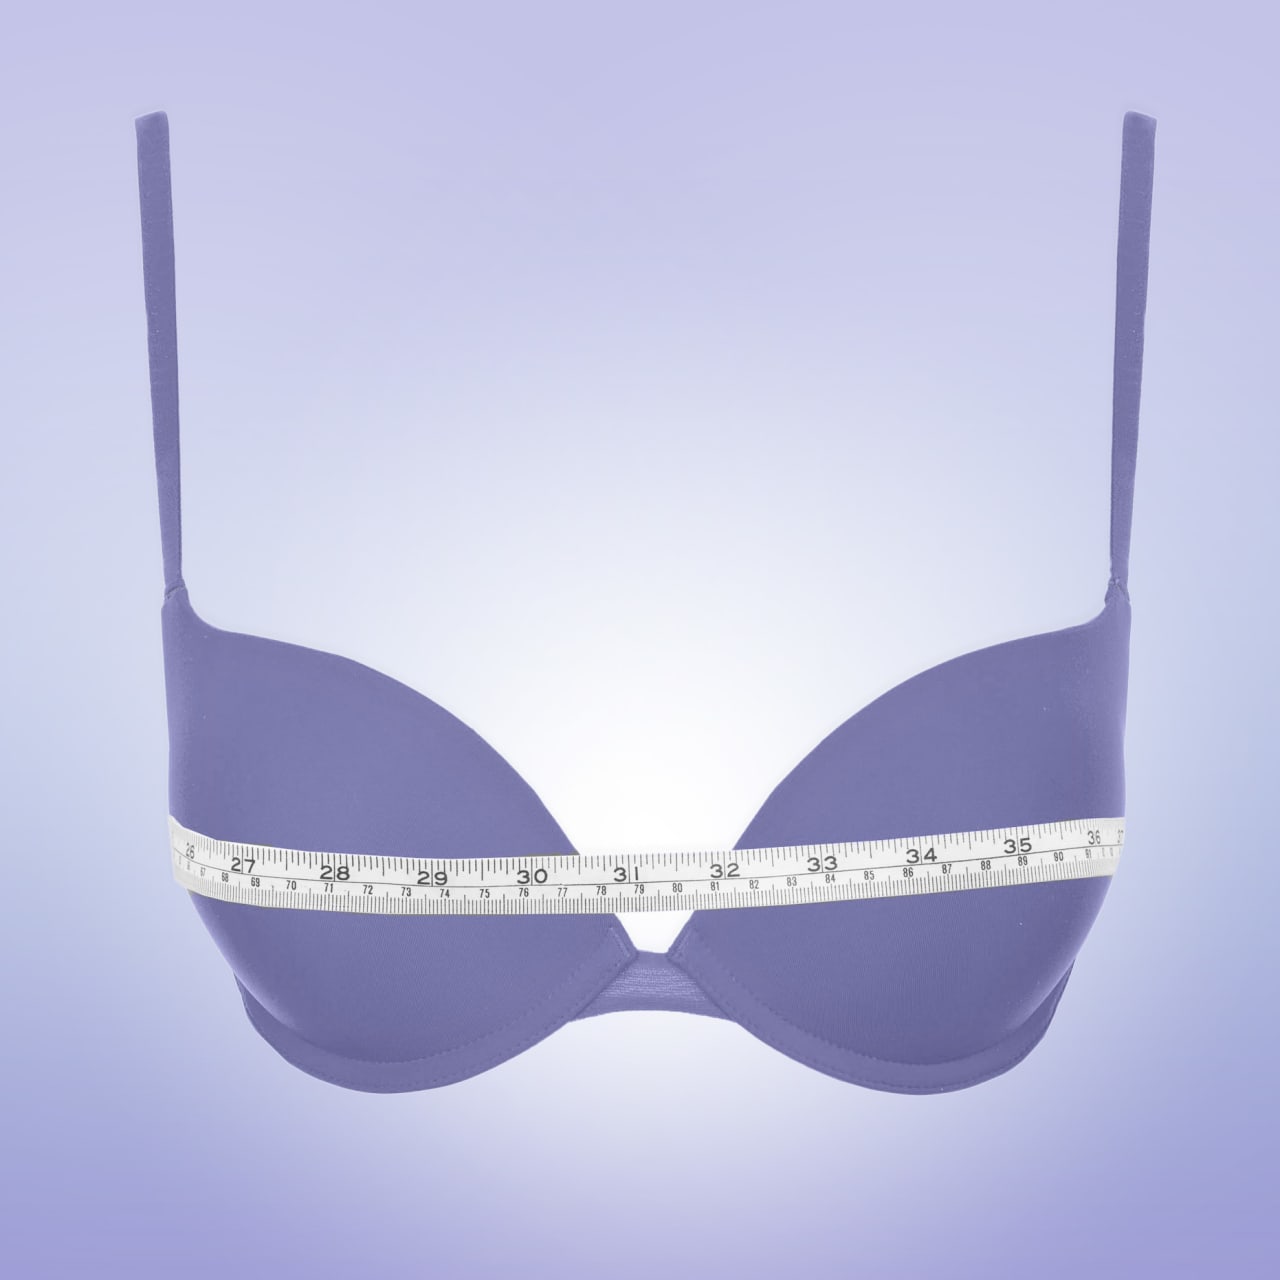 Do You Have to Wear an Underwire Bra to Work? Really? - WSJ